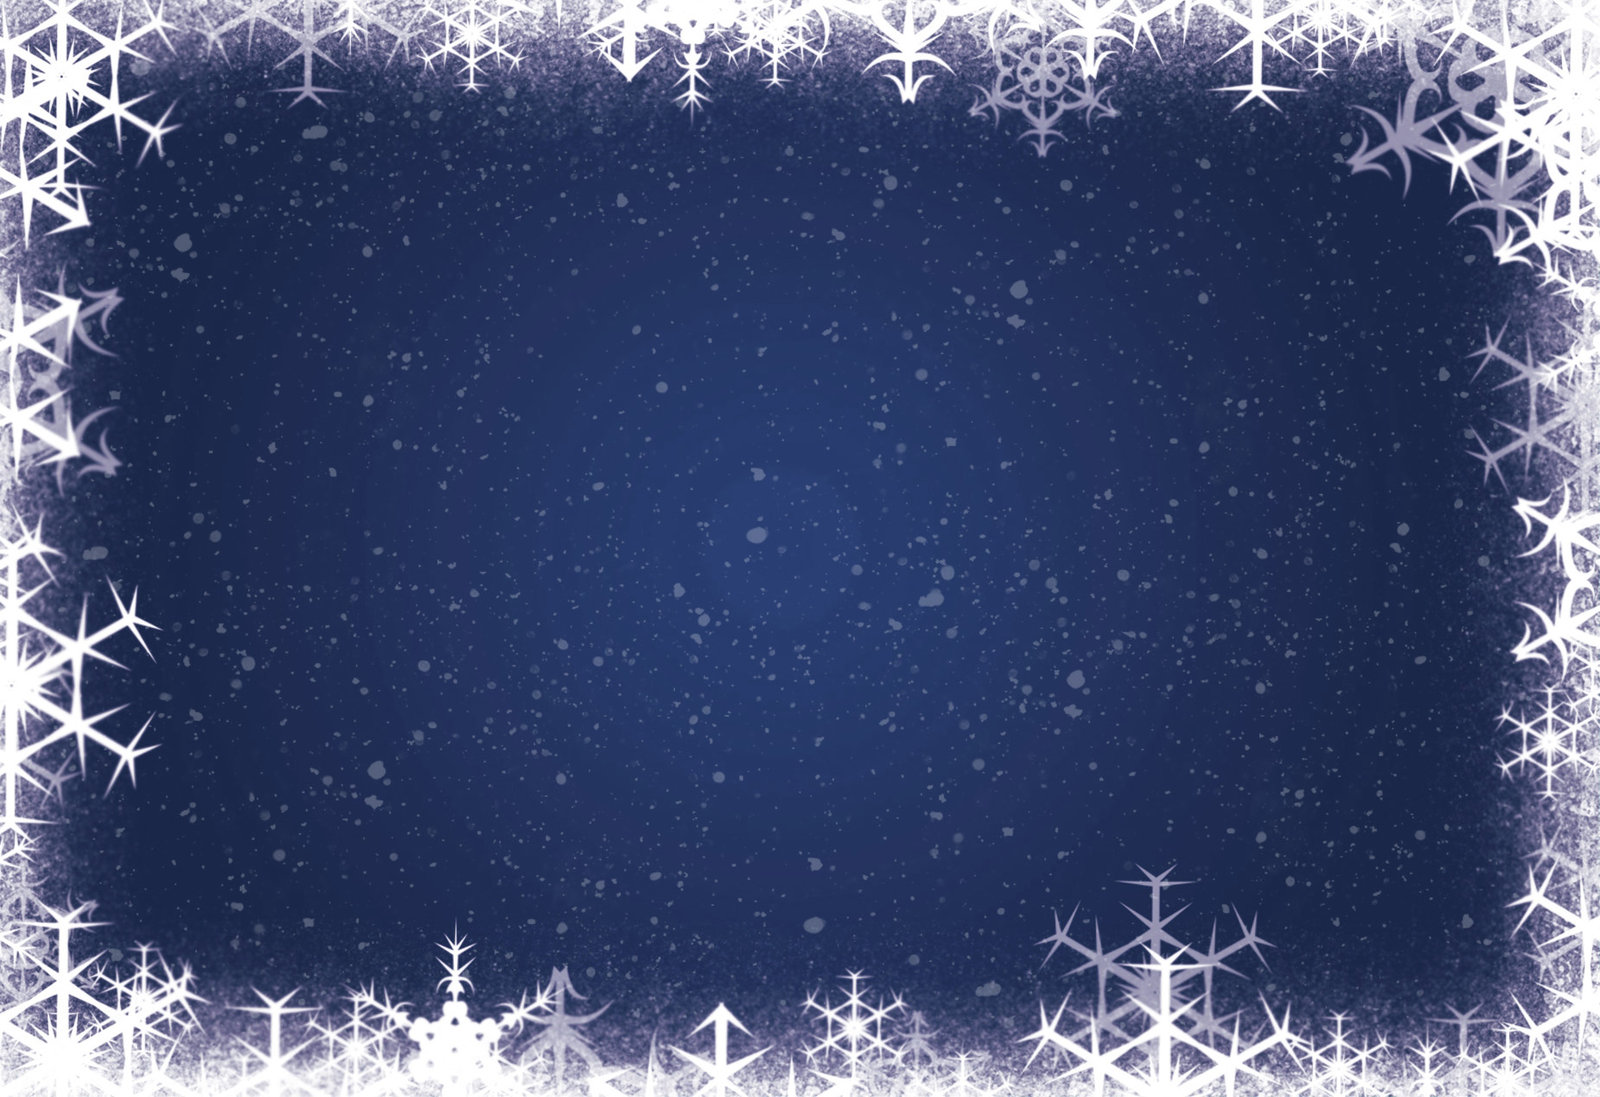 Snowflake Background By Pvs